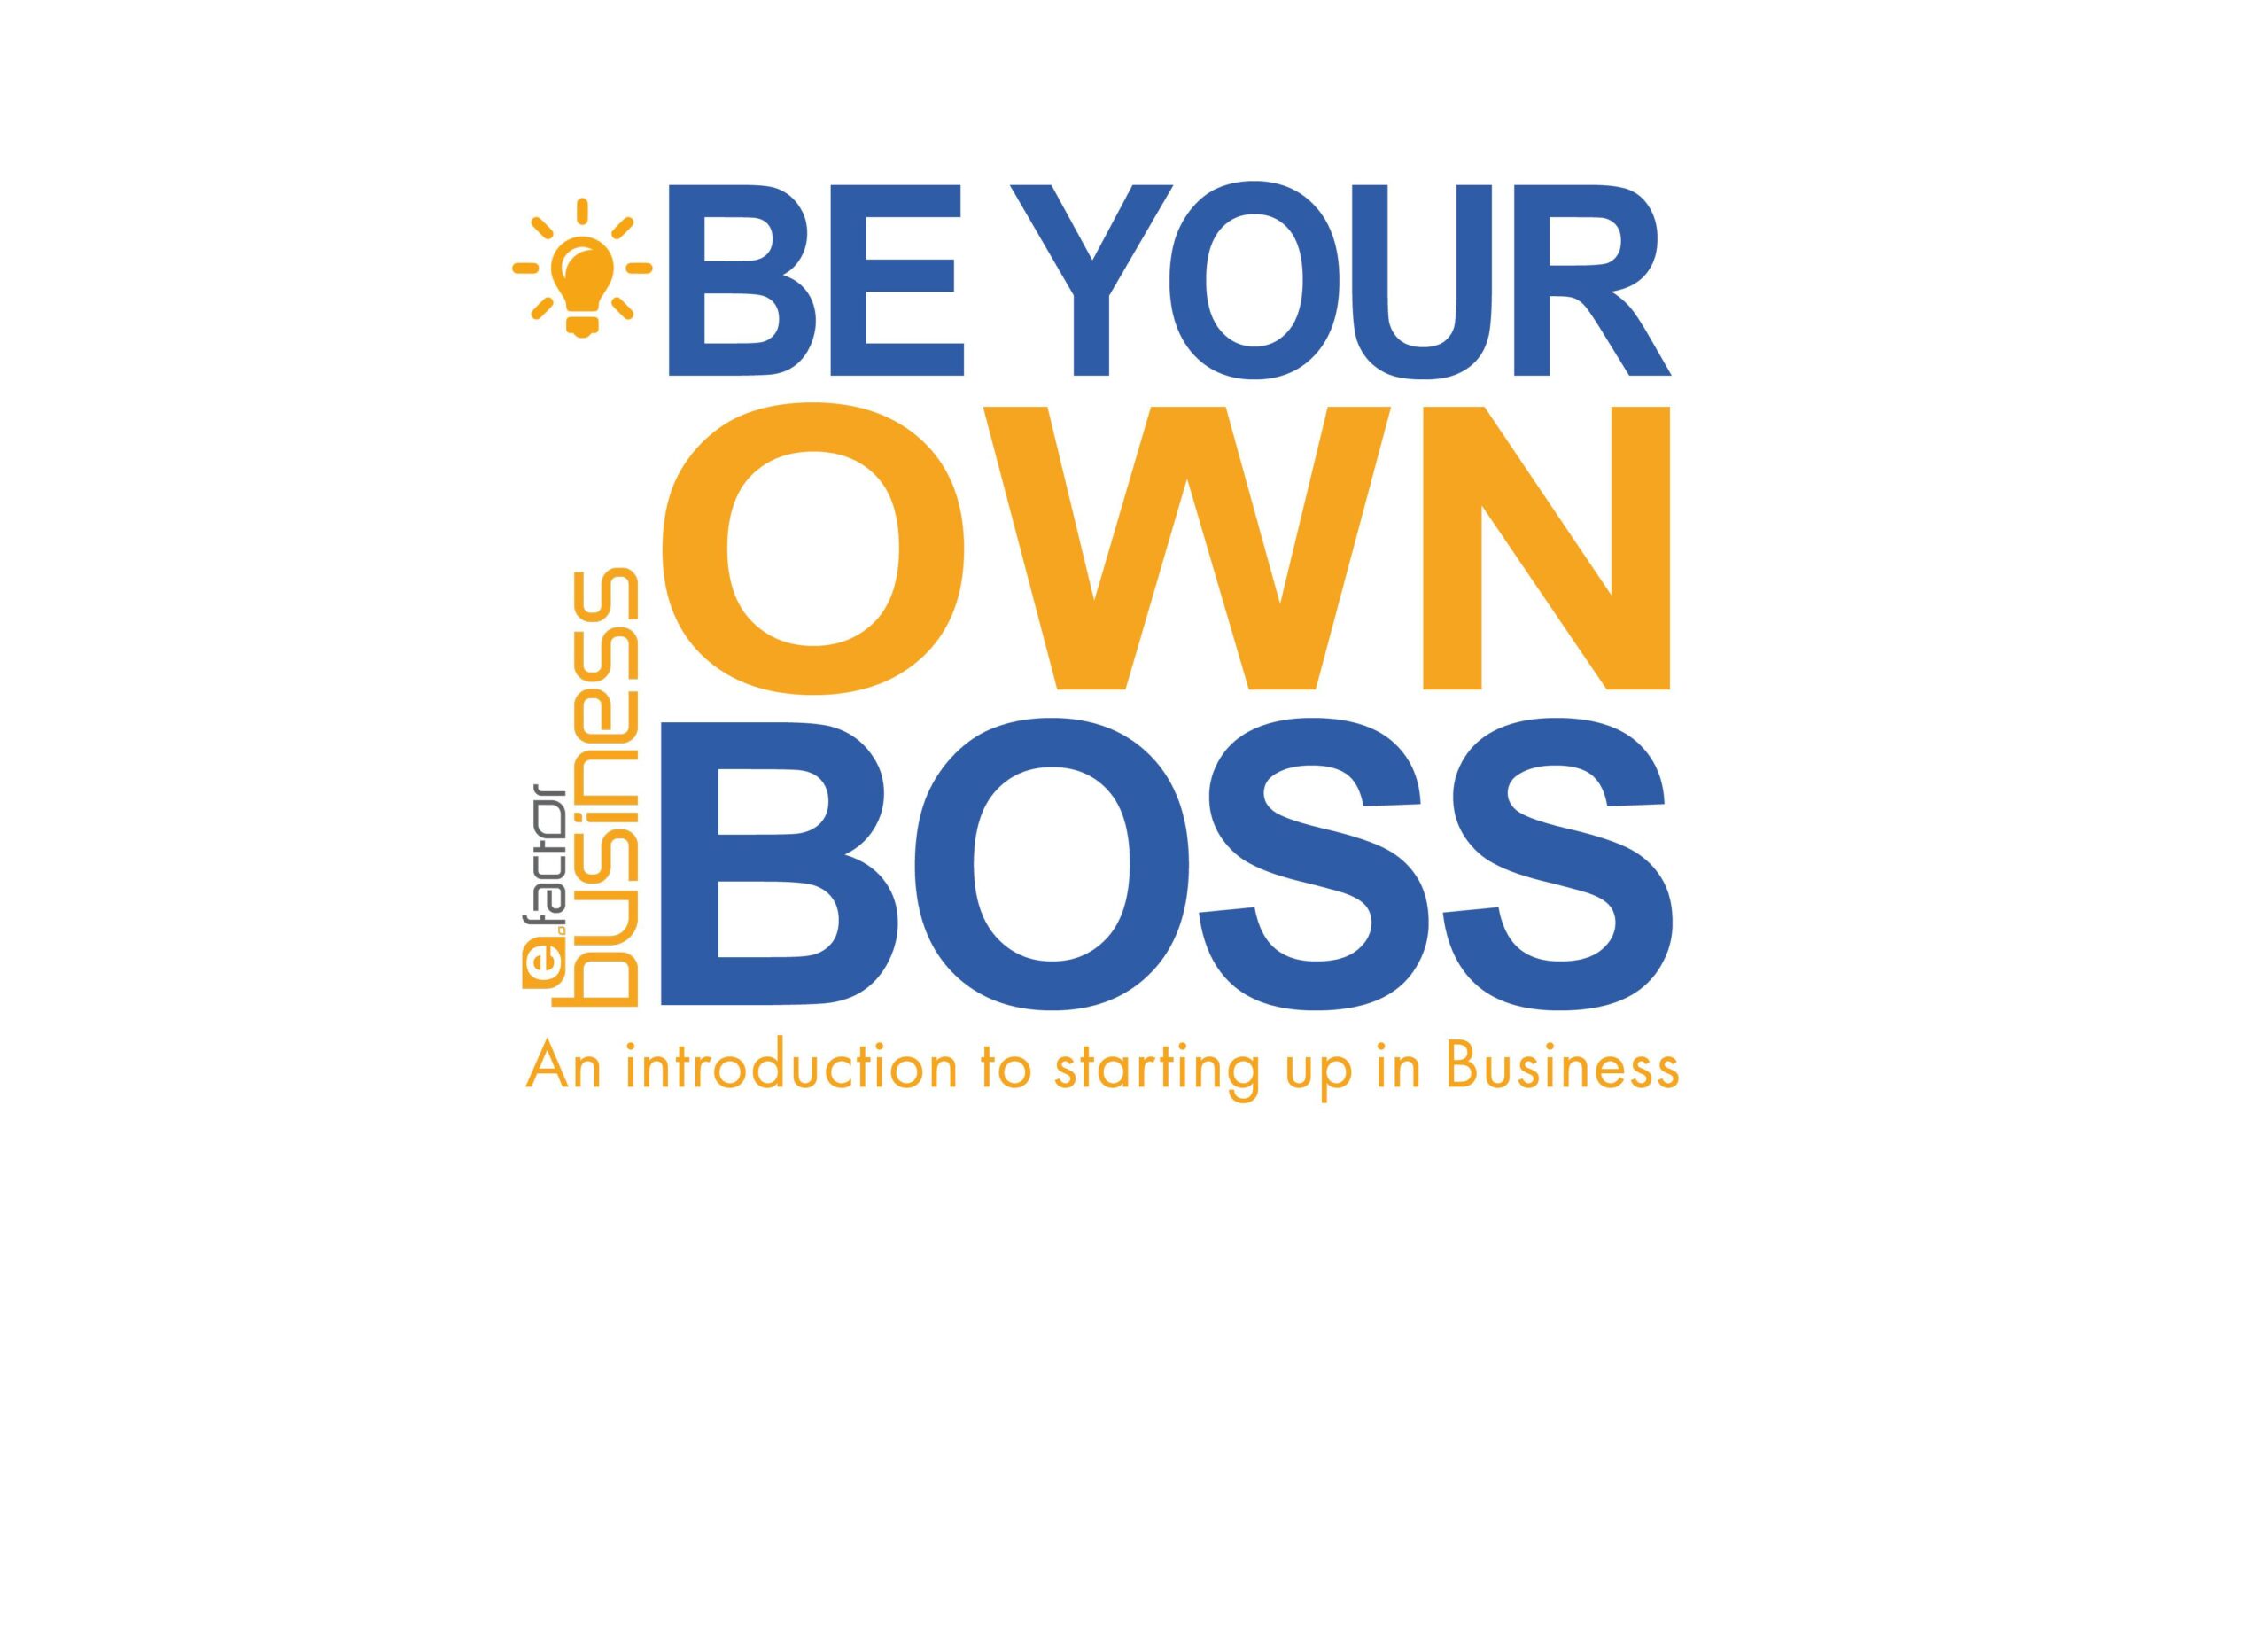 Join our February workshop and learn how to be your own boss - a comprehensive introduction to starting up your own business.